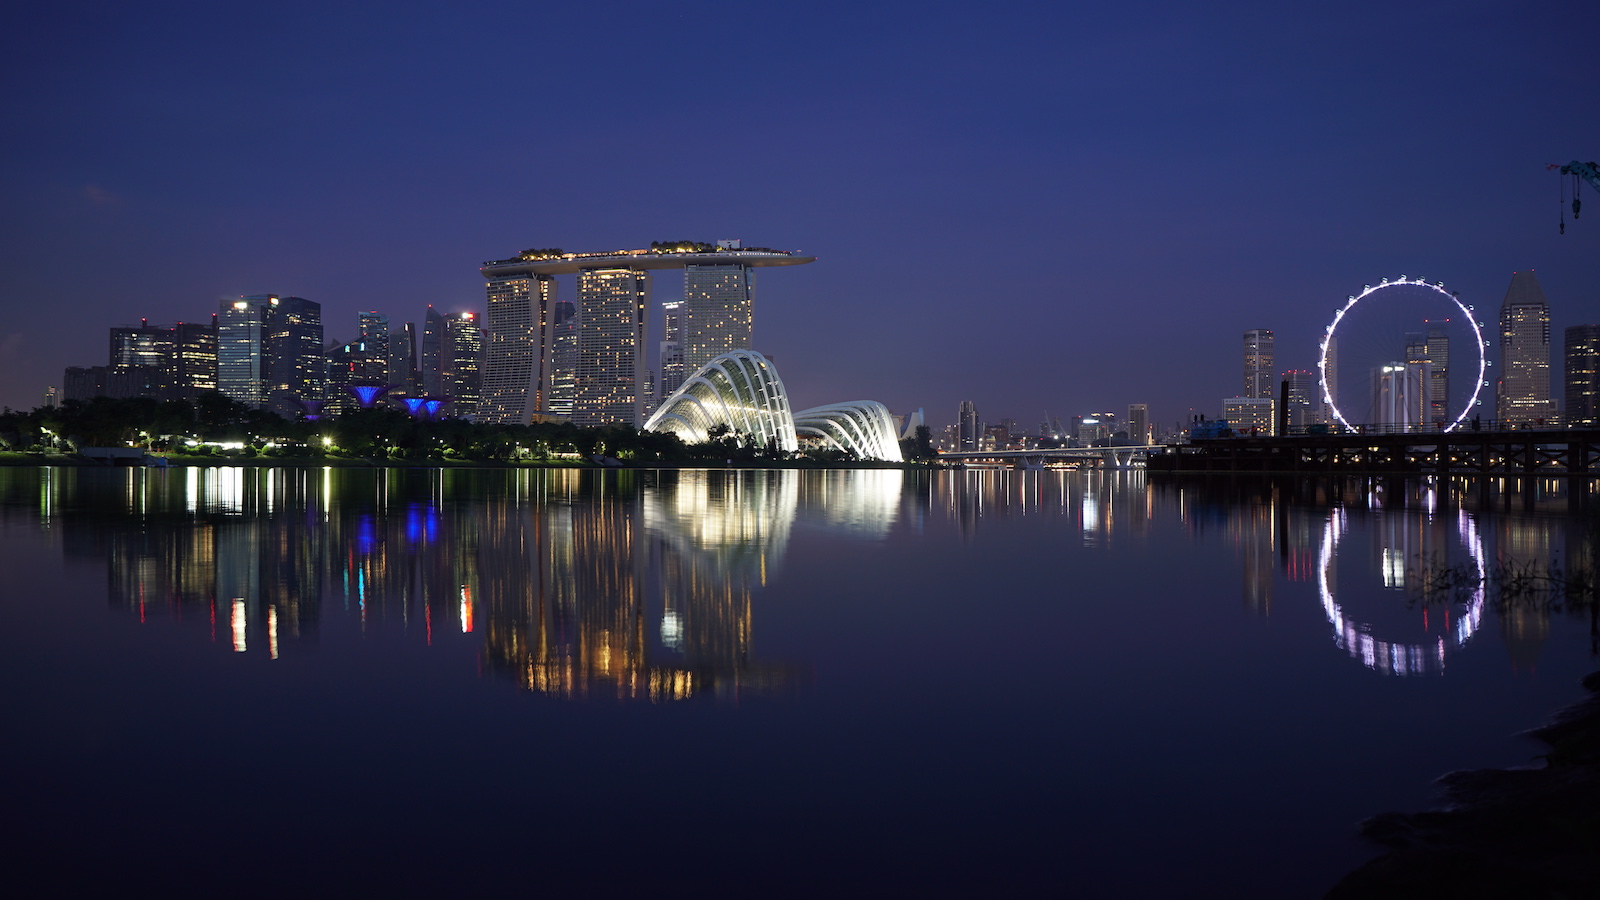 Took a taxi to Marina Bay in the morning around 5am in the morning. I was able to get there early enough to get a great photo of the city lights reflecting over the quiet morning waters in the bay before sun came up.